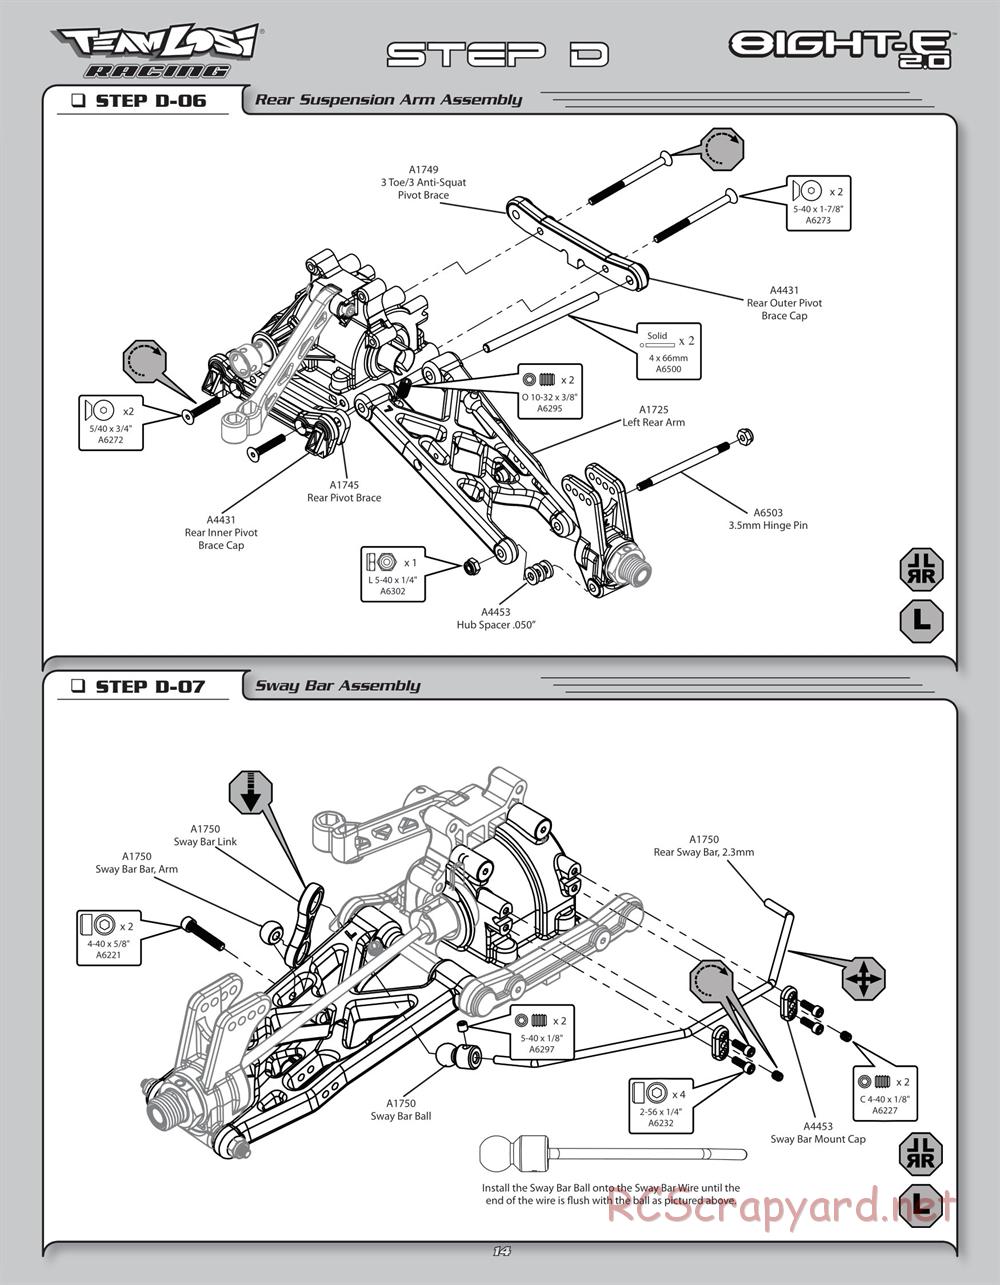 Team Losi - 8ight-E 2.0 Race Roller - Manual - Page 17